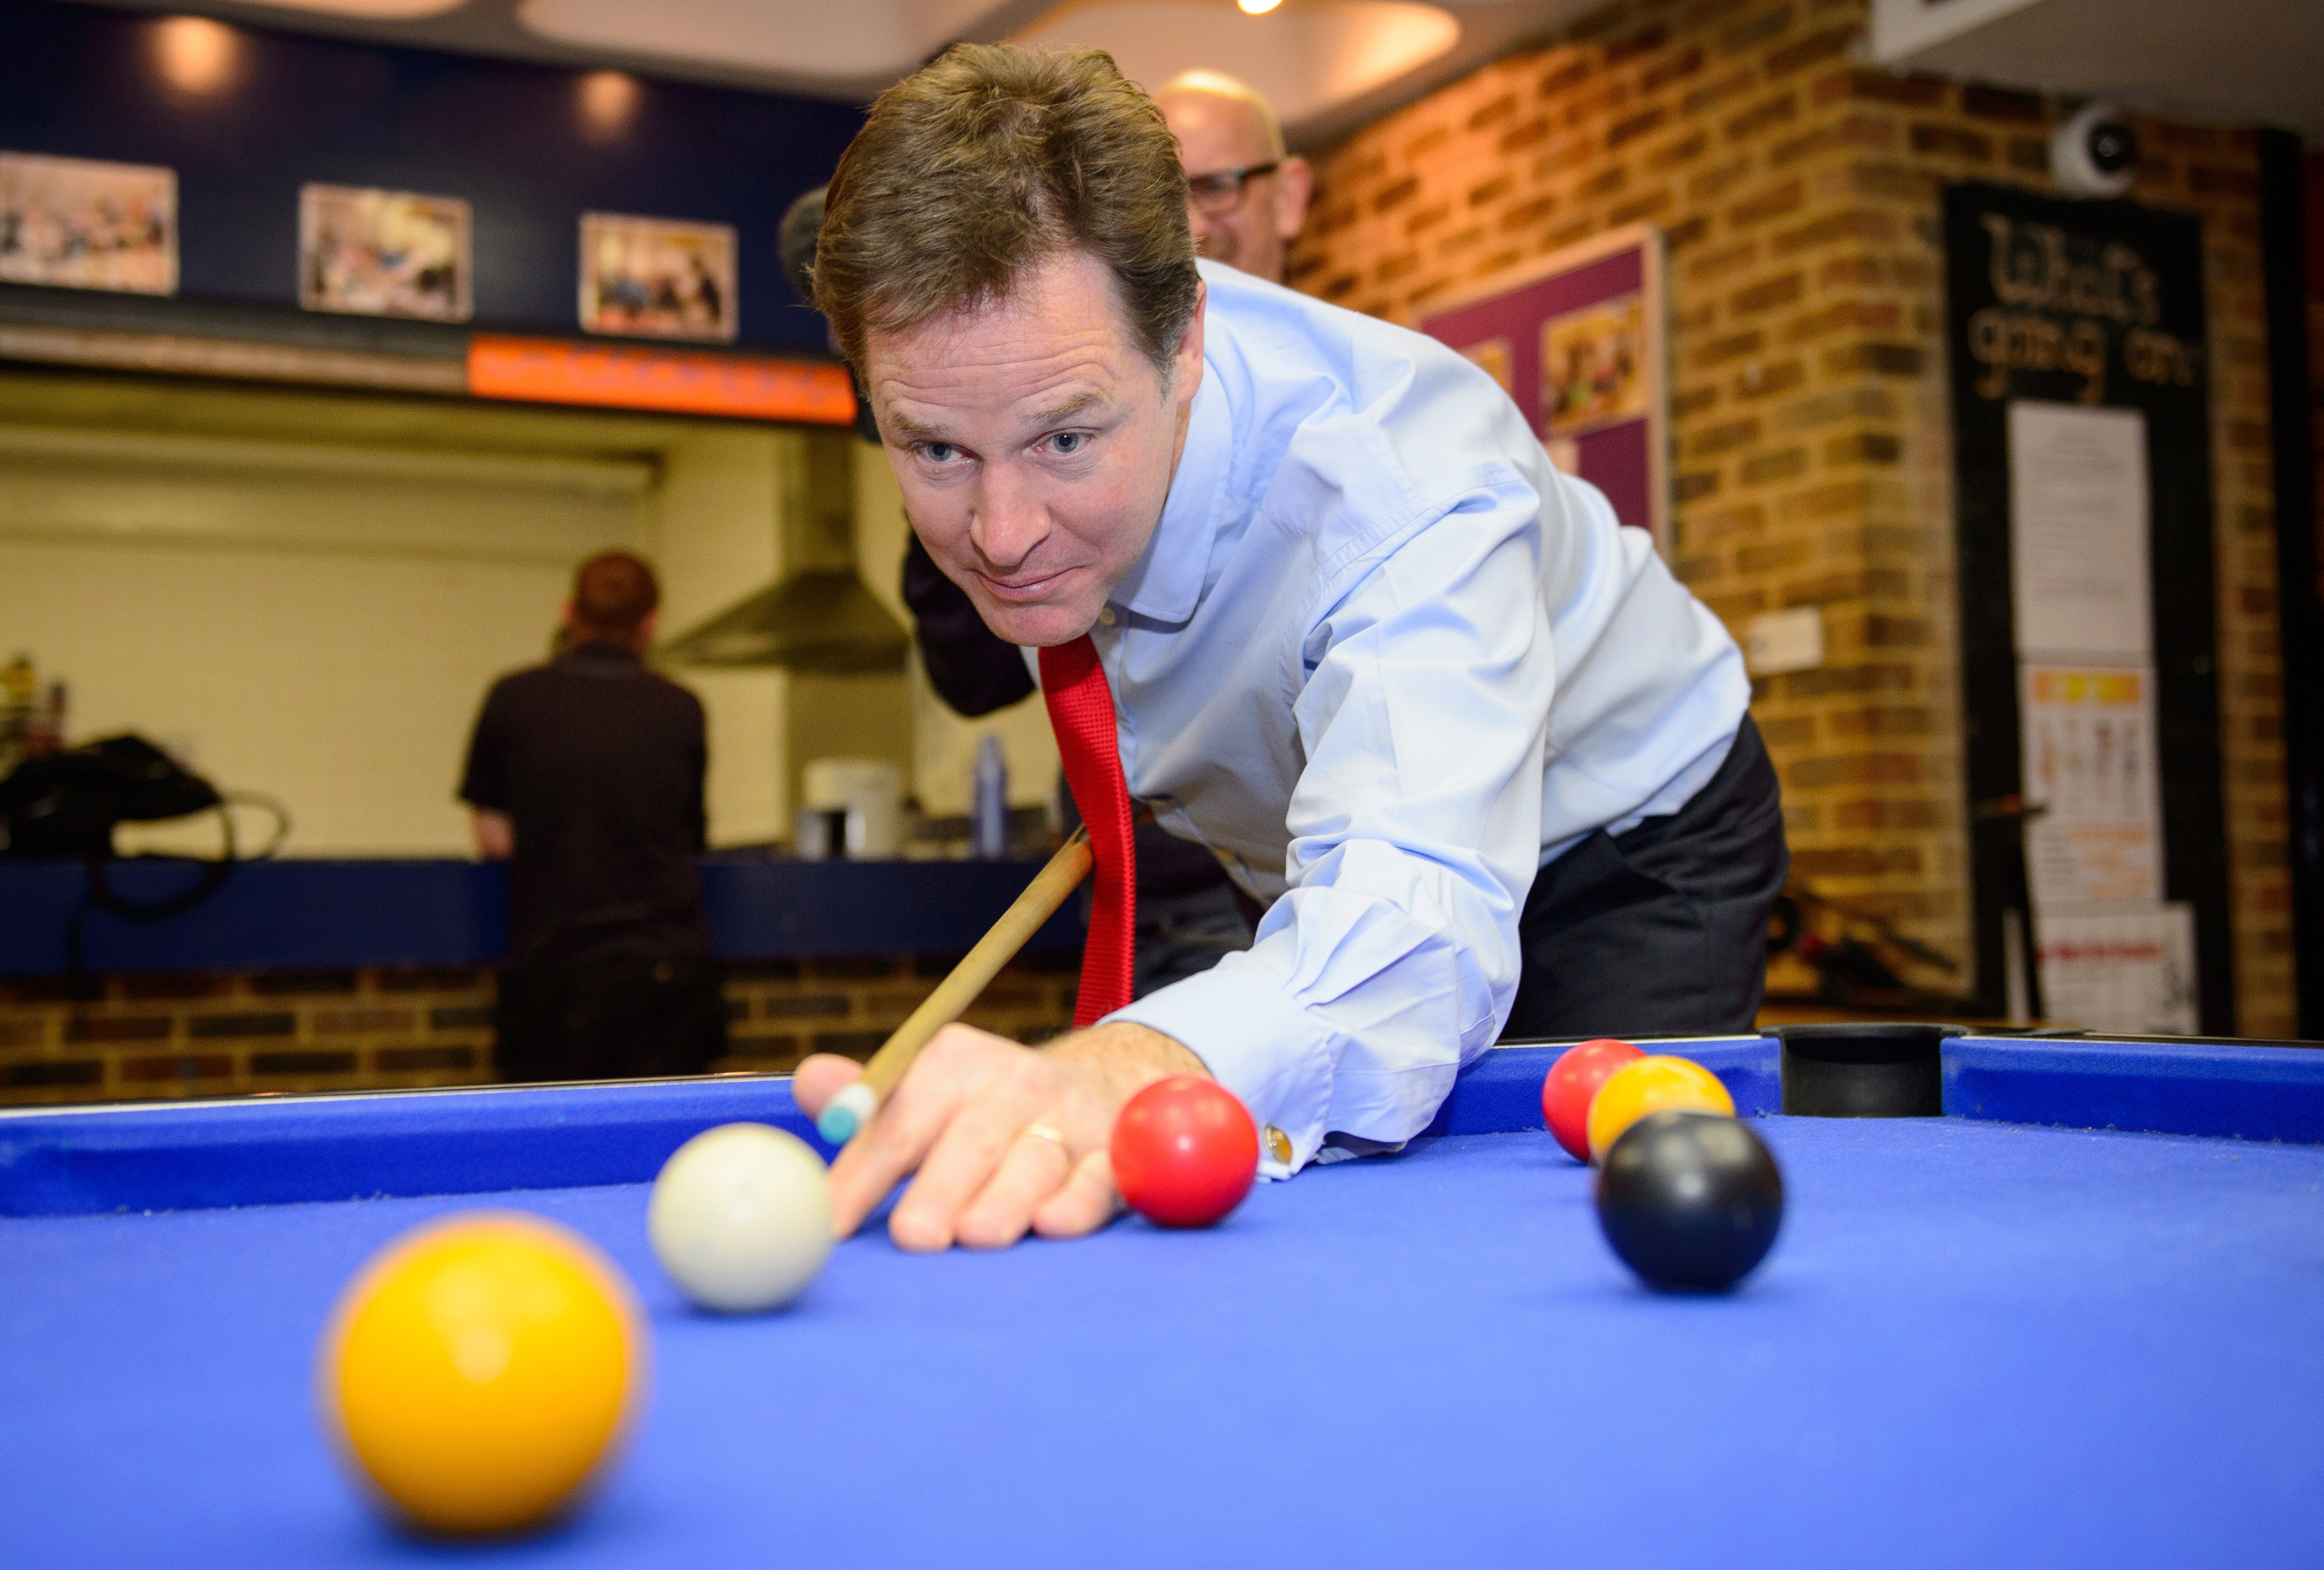 Nick Clegg plays a game of pool 